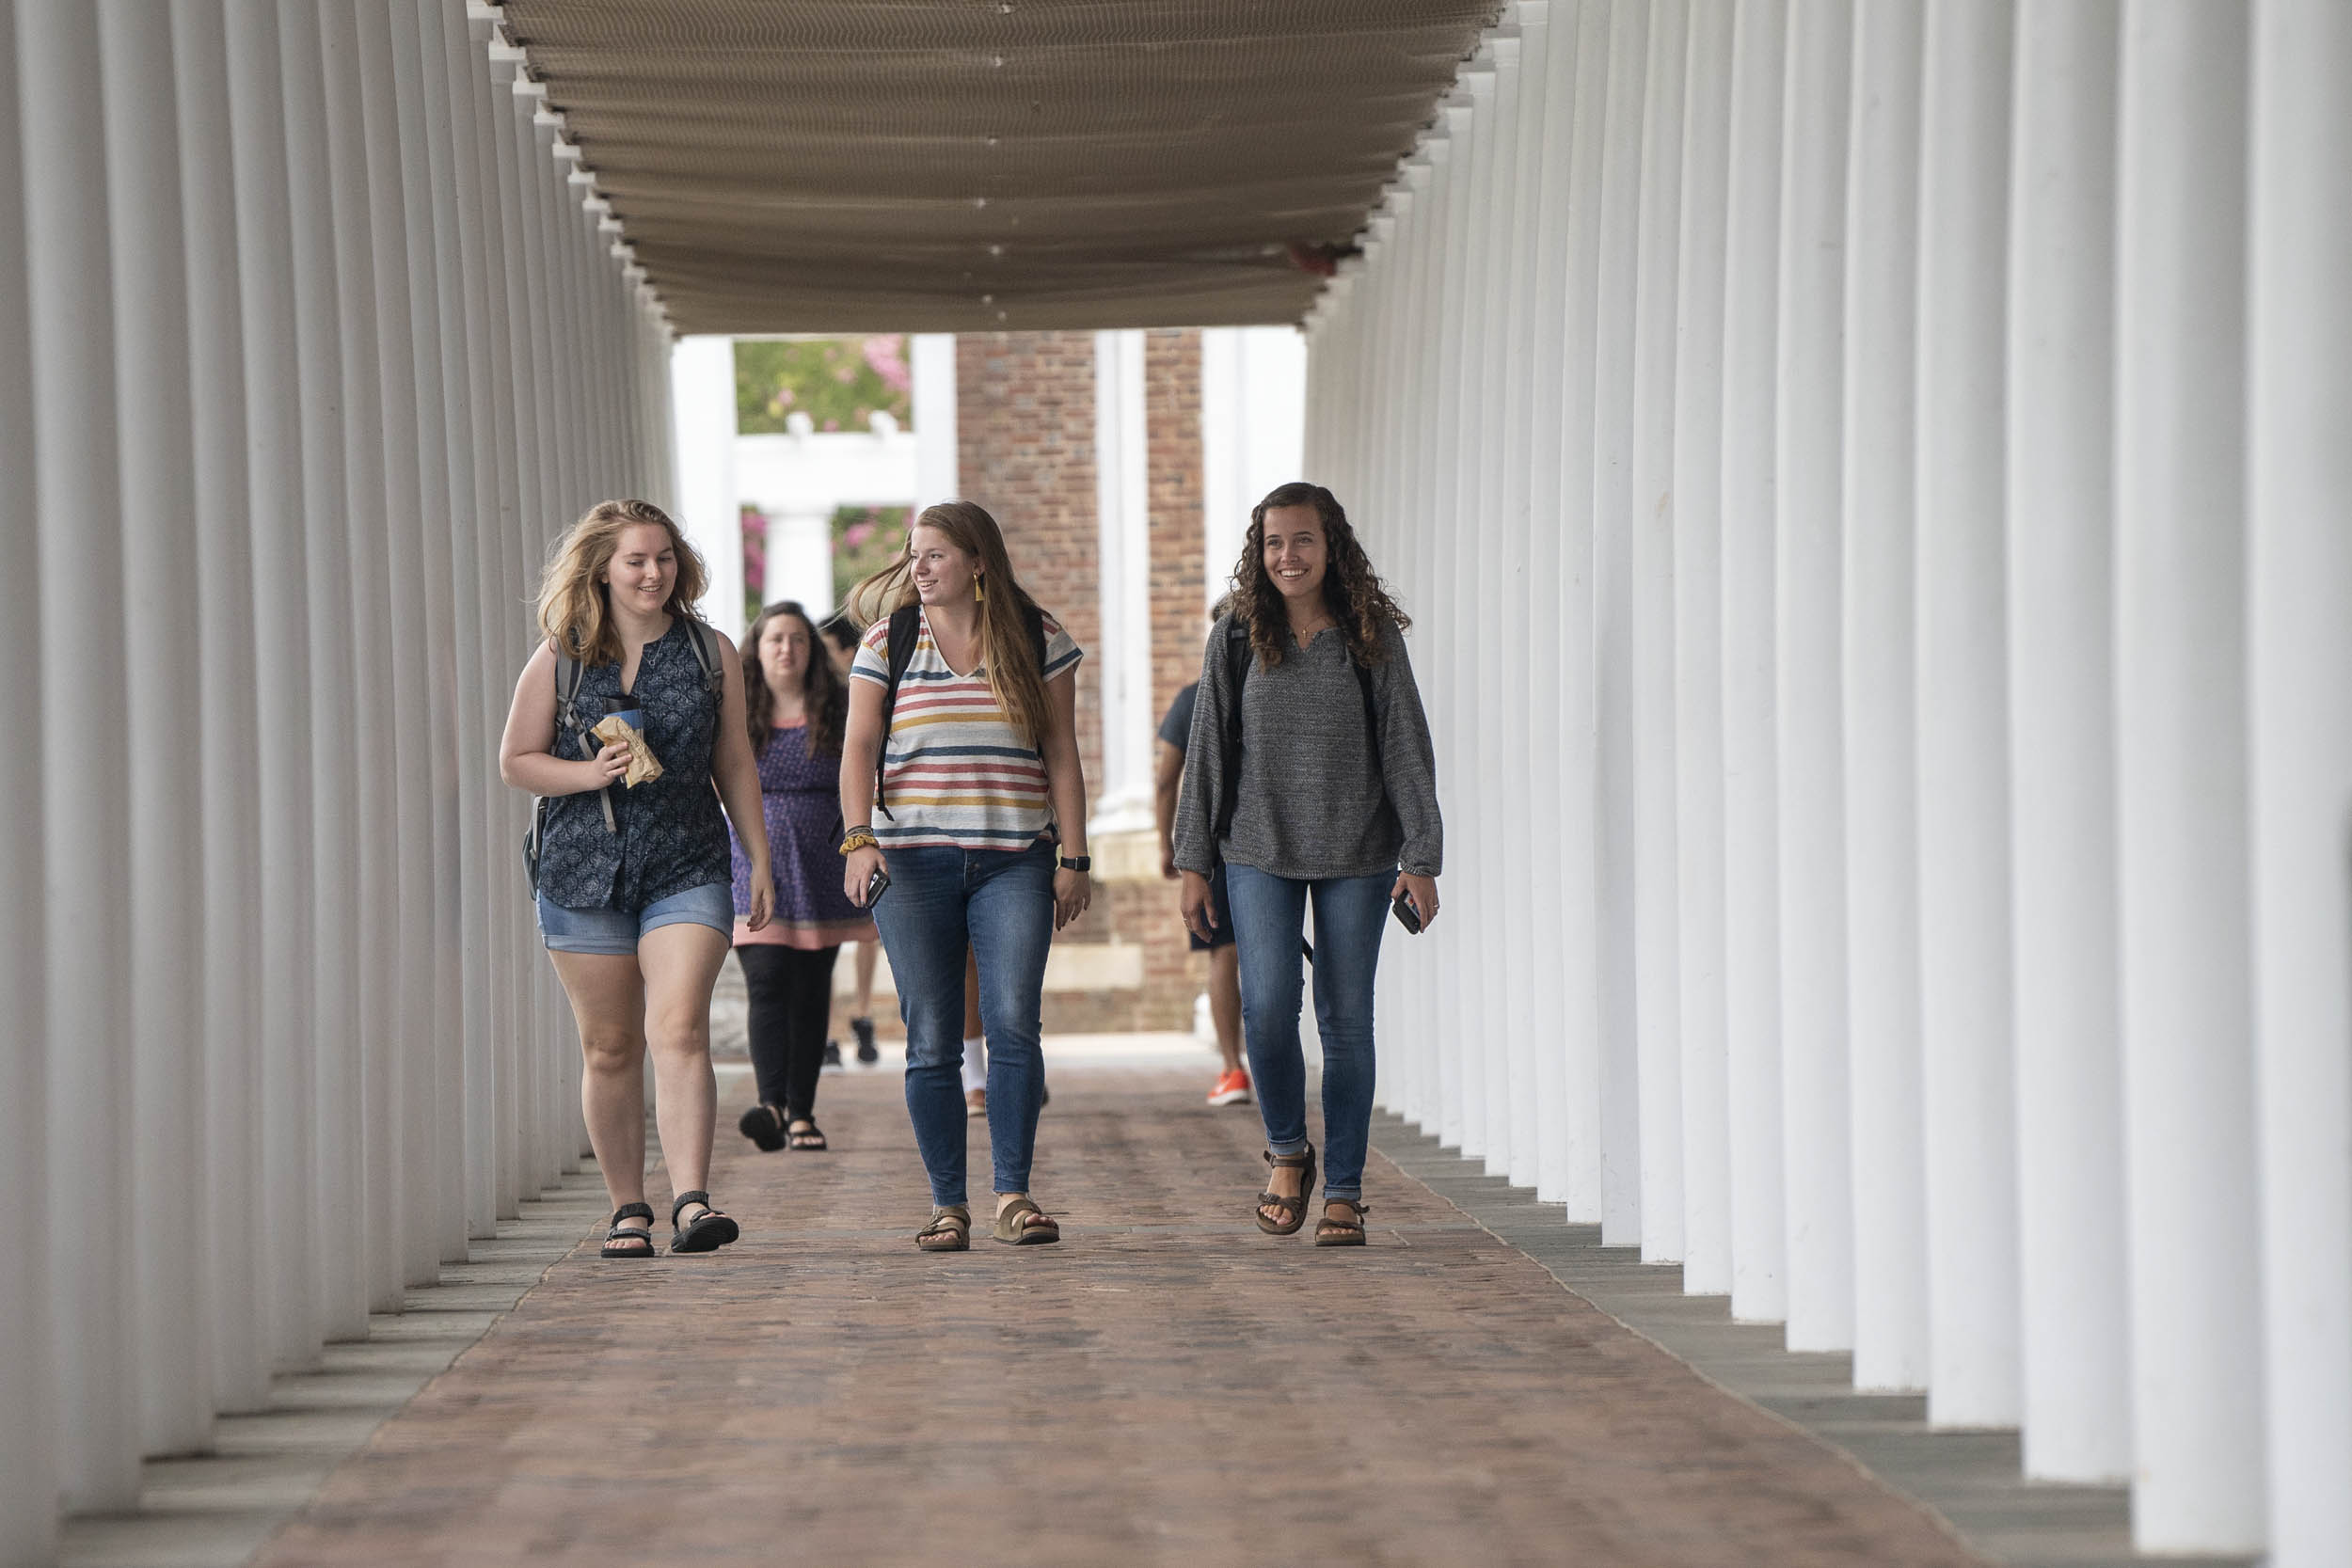 Students walking down a sidewalk lined with white columns